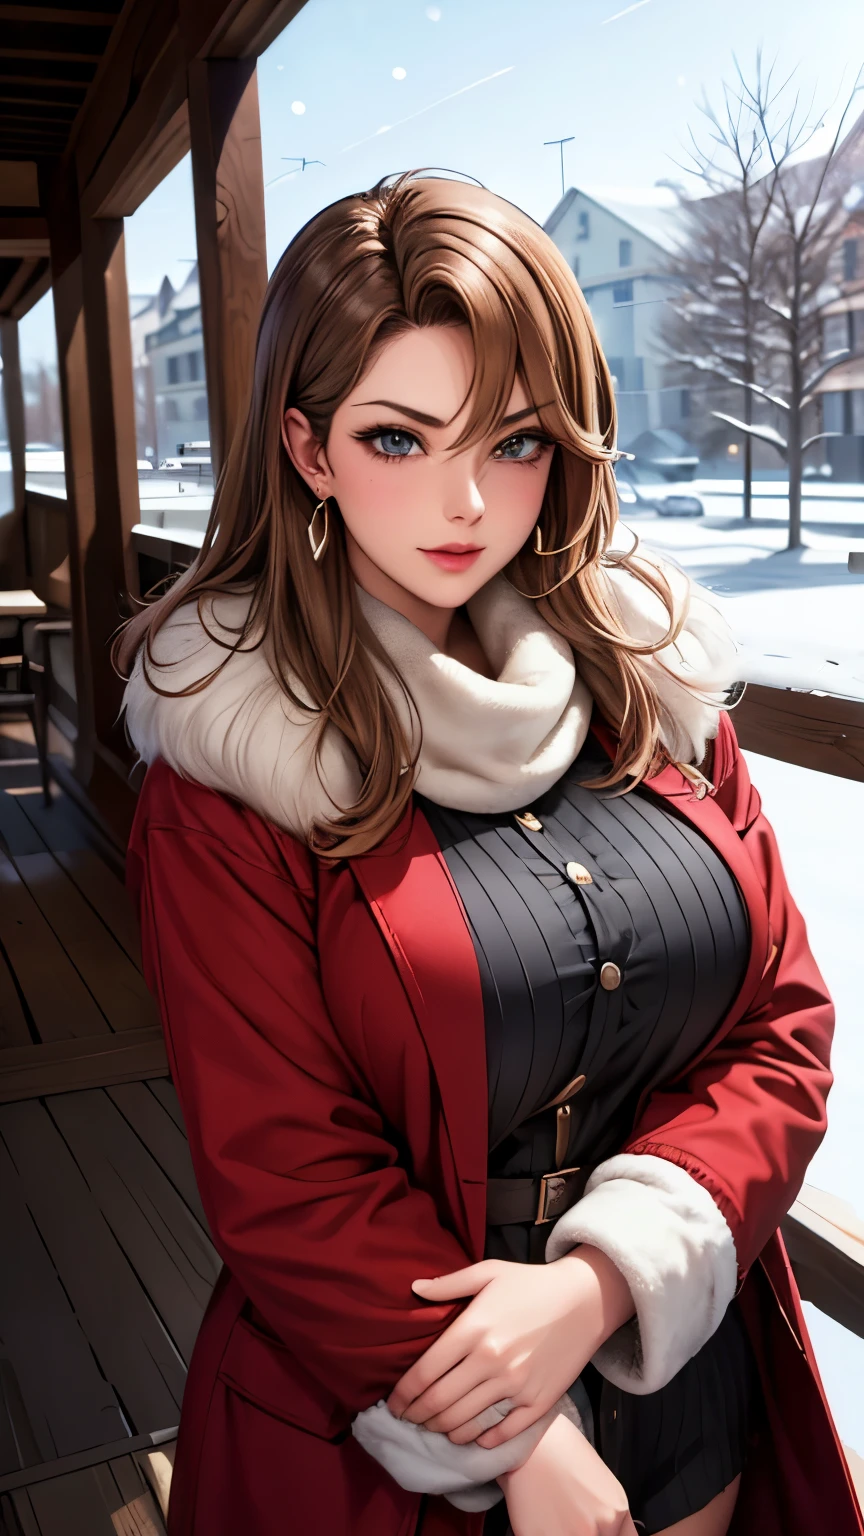 1 girl, just_wood, Brown_eye, Brown_hair, buildwg, cow, cross_earrwgs, earrwgs, fur, fur trimmed_cow, fur_collar, fur_scarf, fur_trim, jewelry, lips, shorthair, lookwg for_w_viewer, outdoor, snow, snow, 一人w, wood, upper_body, wwter, wwter_Clothes, be familiar with_eye,big breasts, brwg your arms closer, chest facwg camera, big, ears are stickwg out, Golden rwio face, Golden rwio body, highest quality, ultra high resolution, Front hair